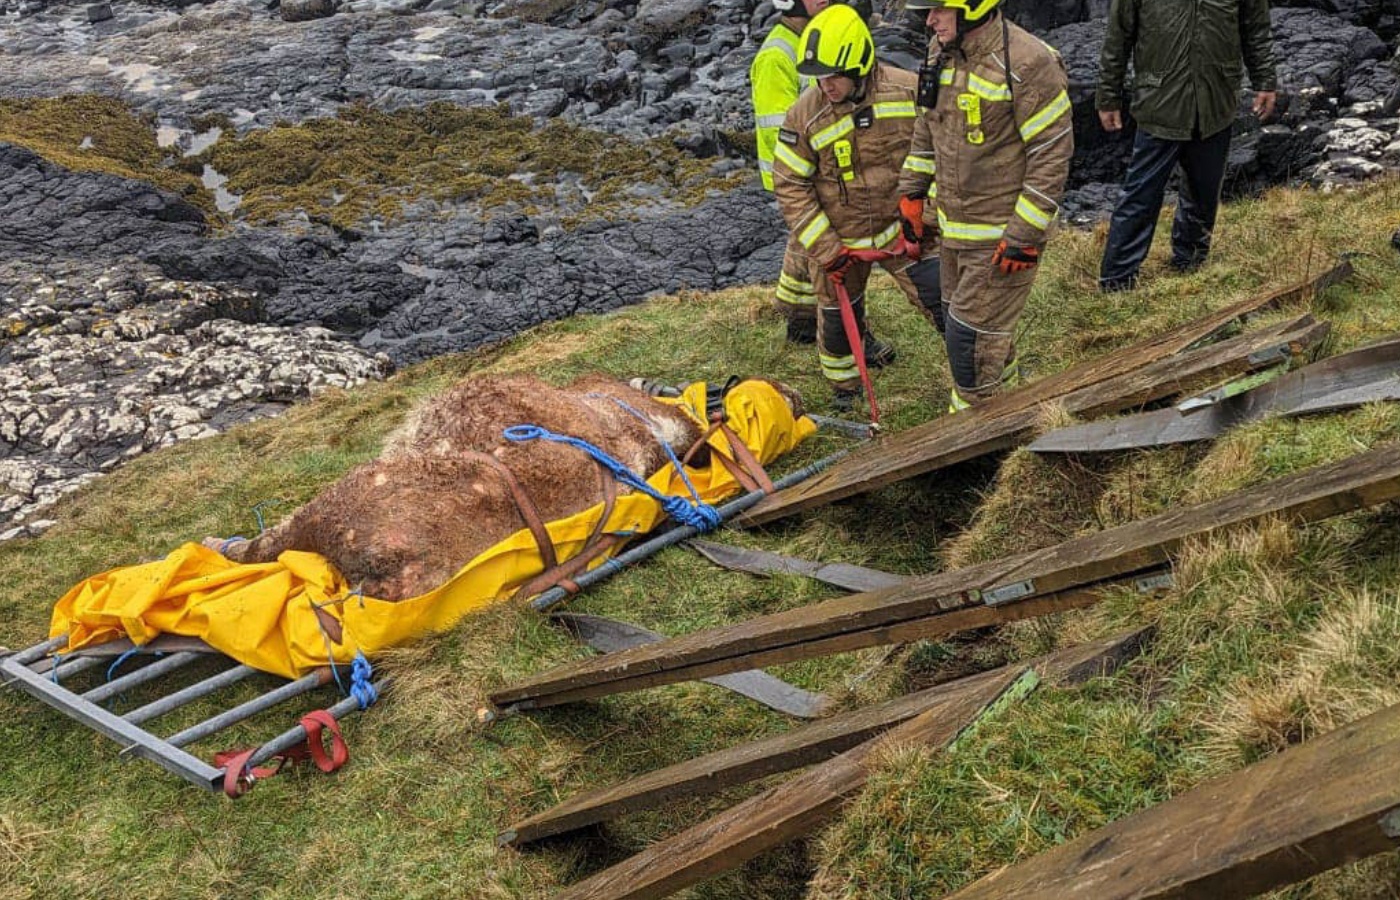 The cow was successfully rescued. 